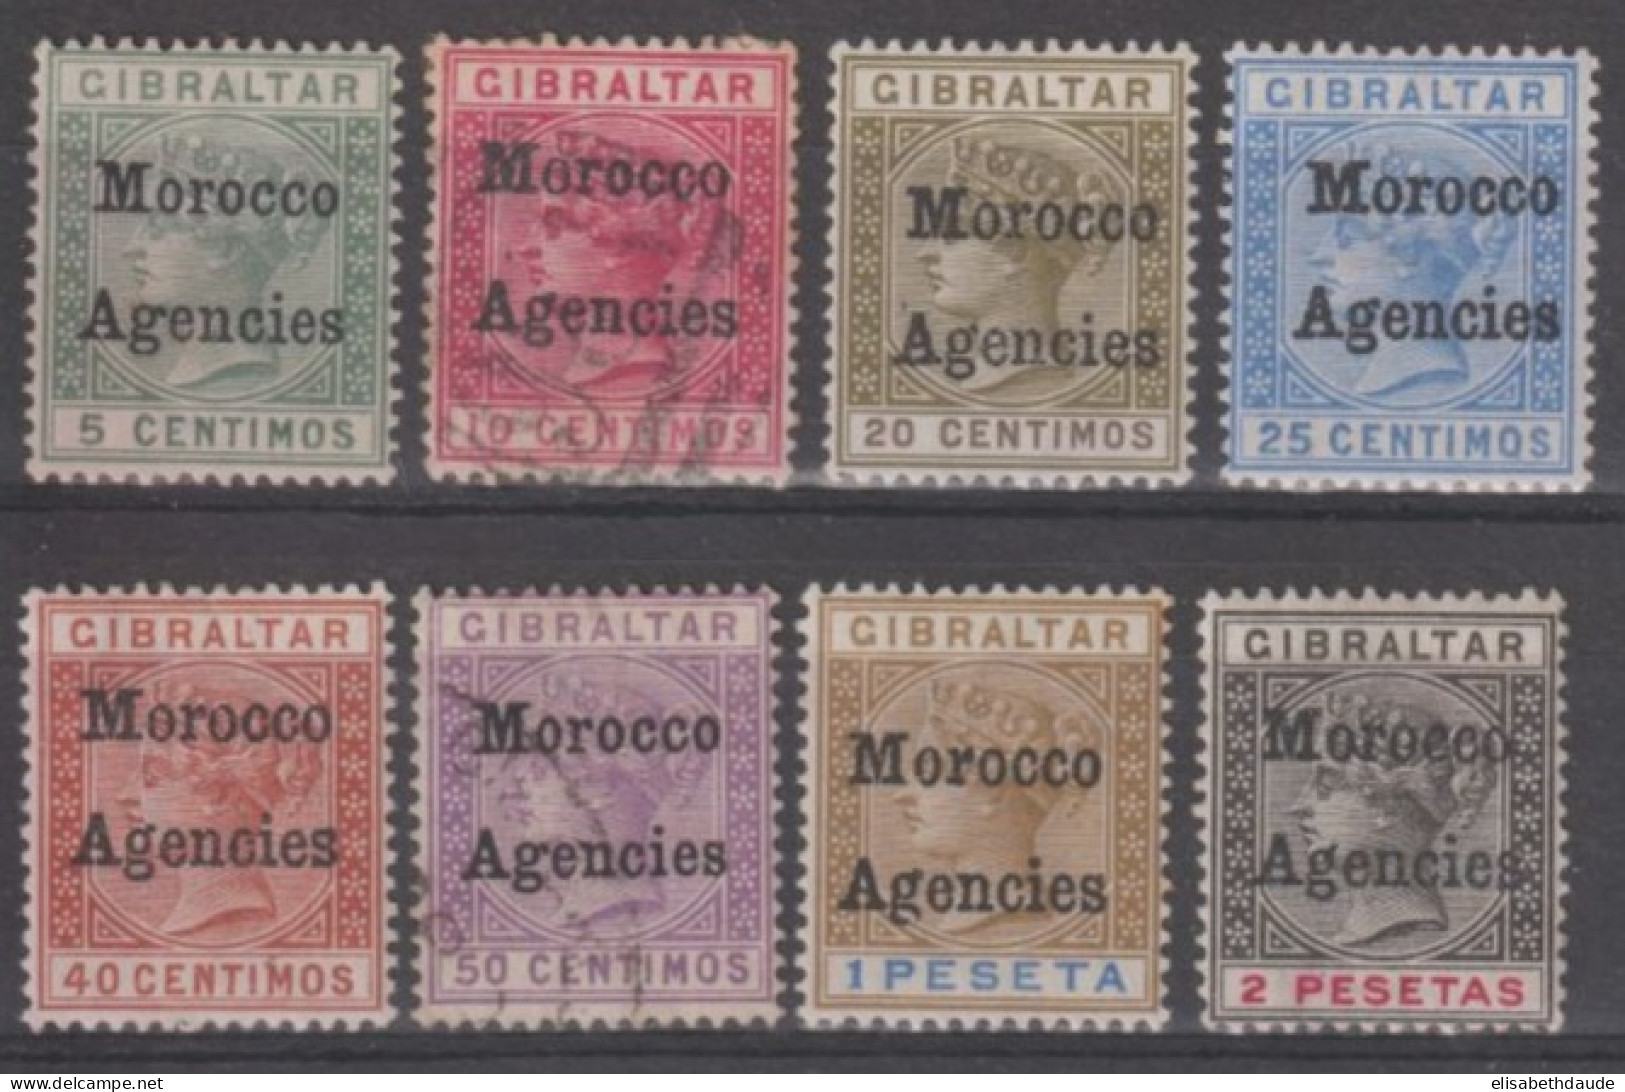 MAROC BUREAU ANGLAIS - 1898 - YVERT N°1/8 * MH + OBLITERES/USED - MIXTE SURCHARGE LONDRES ET LOCALE - Uffici In Marocco / Tangeri (…-1958)